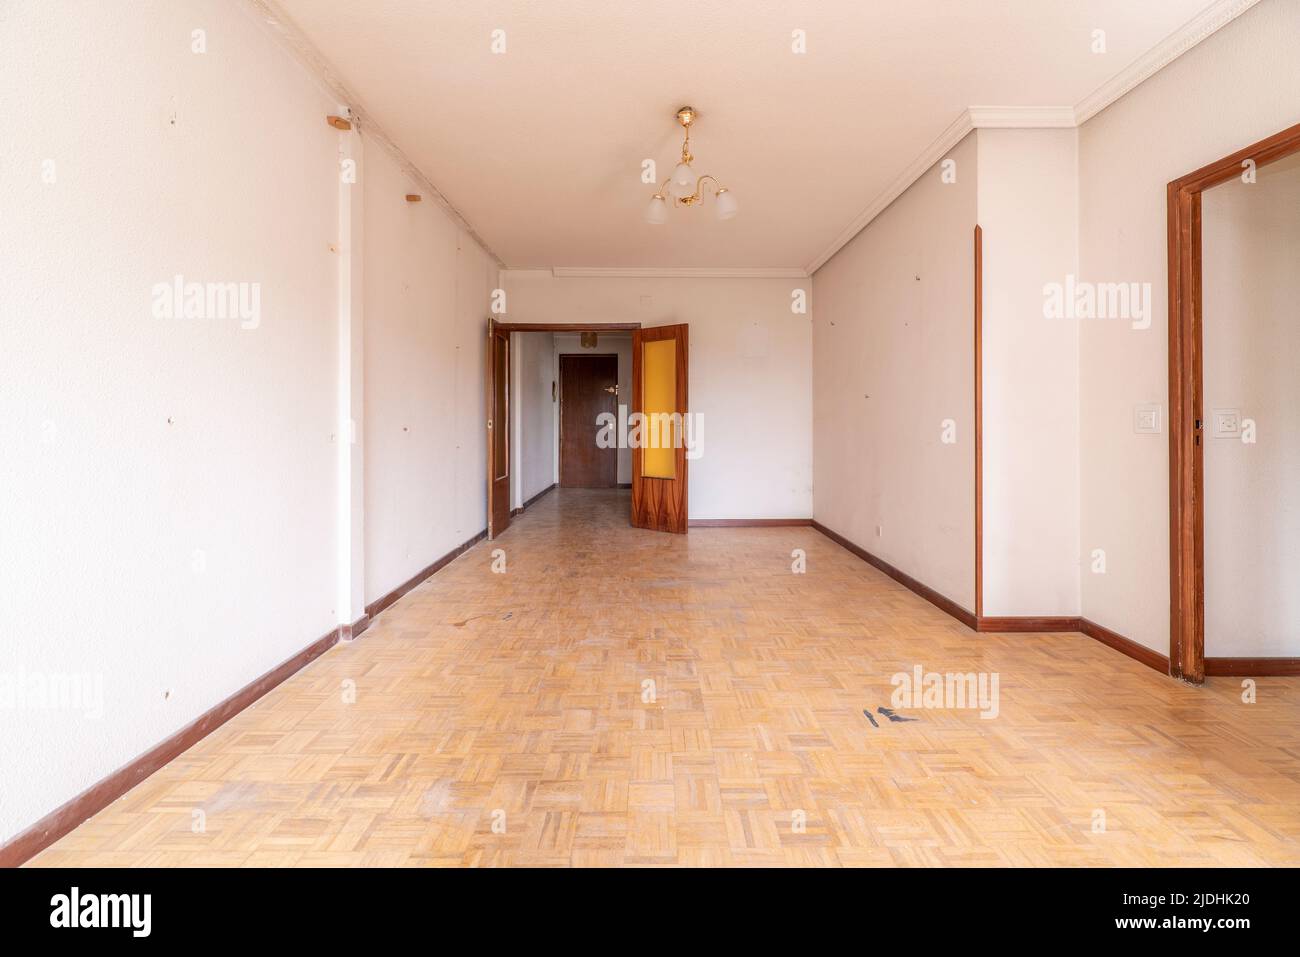 Empty room with parquet floors in need of a coat of varnish, wood carpentry and orange glass on the doors Stock Photo